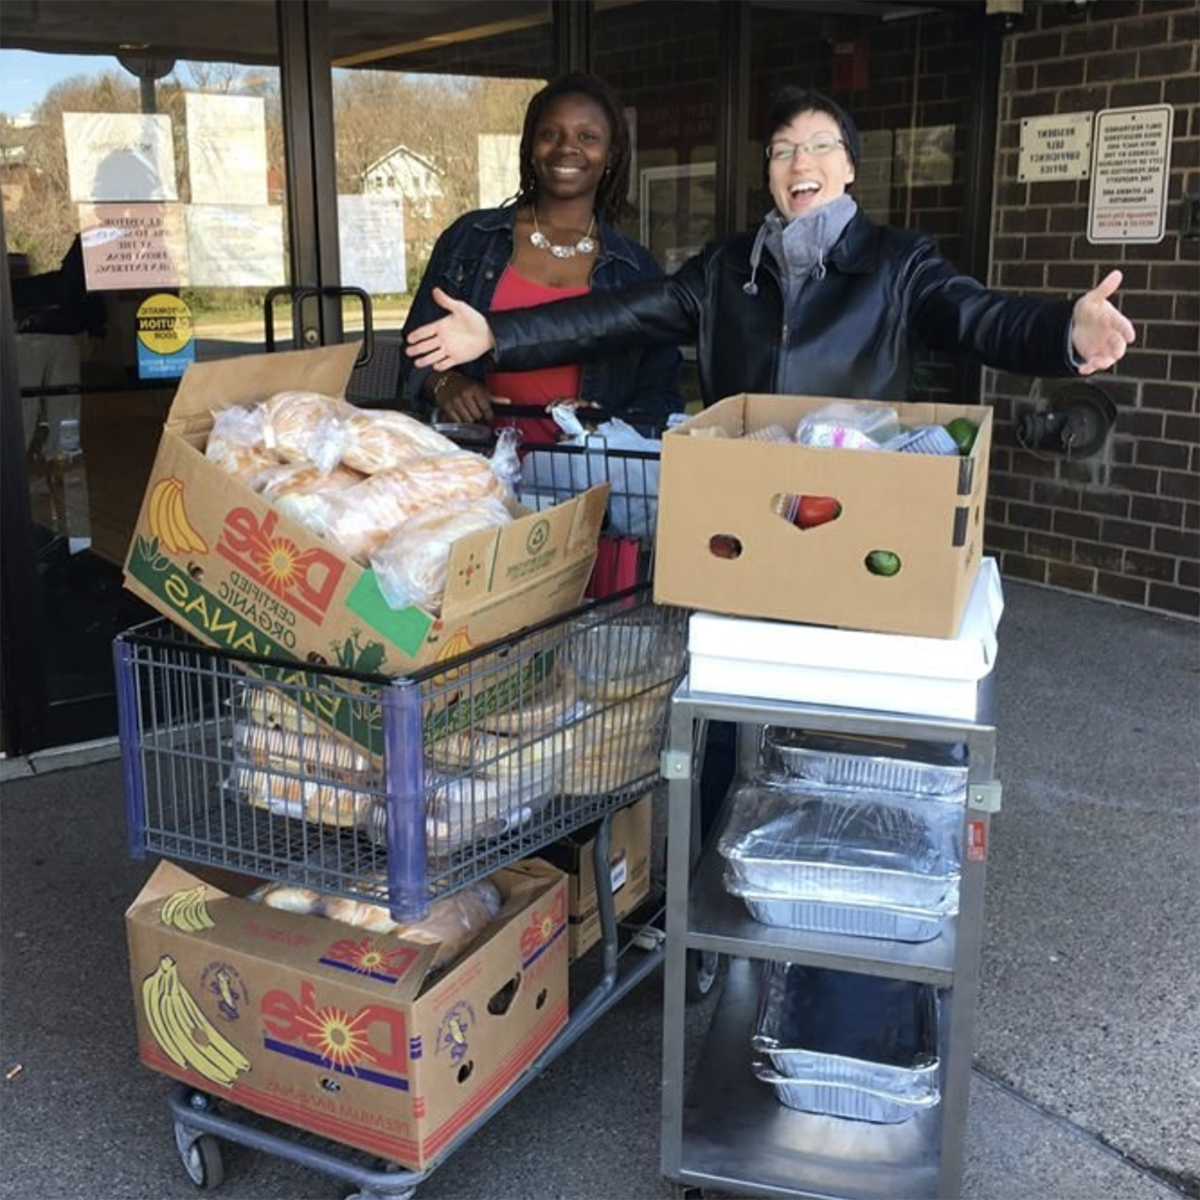 Photo of two people smiling and posing for a photo in front of carts full of food, in front of a grocery store entrance